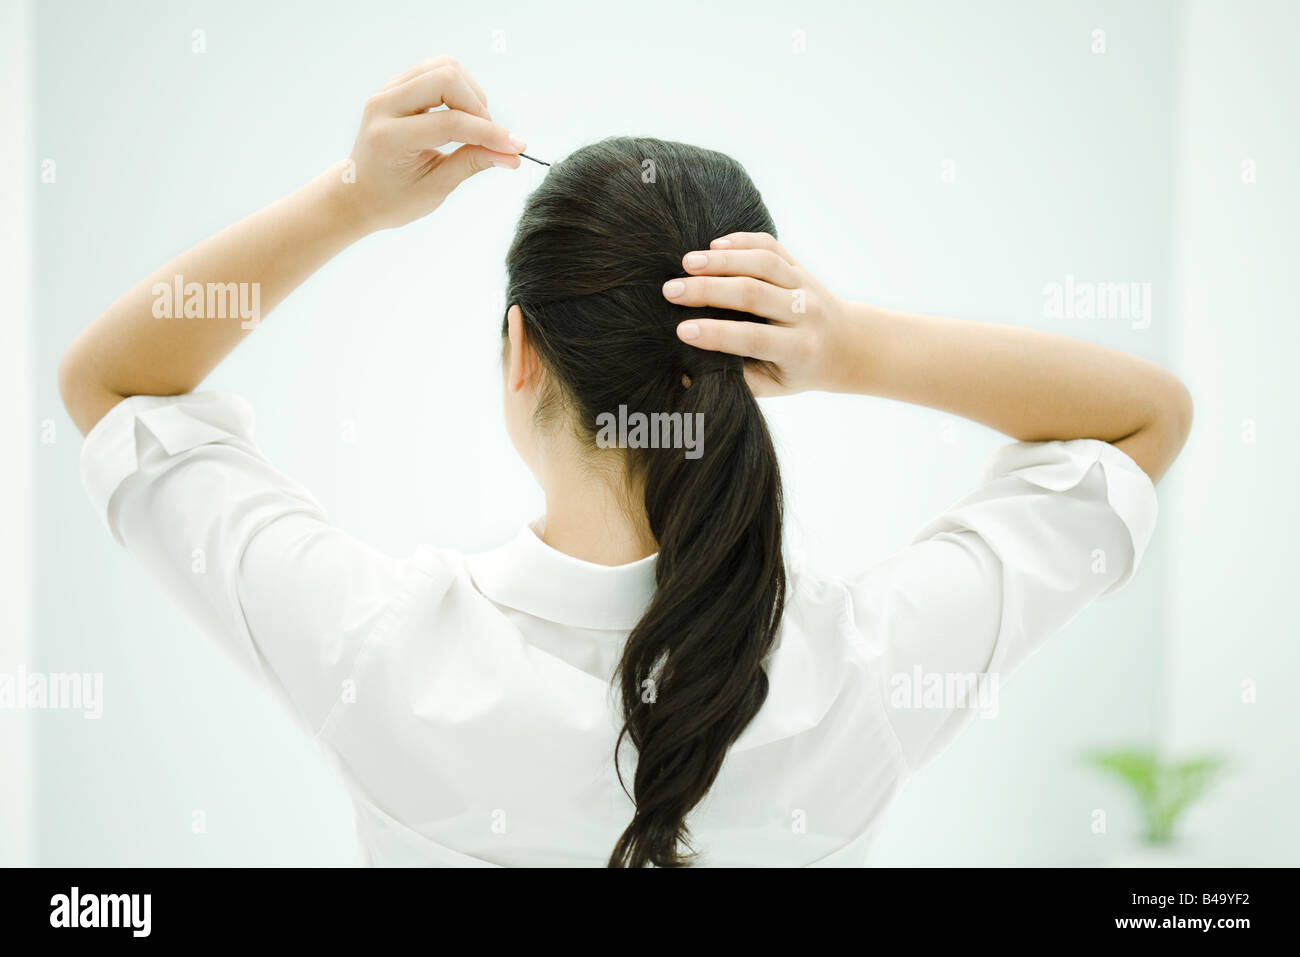 Woman putting hair in ponytail, arms raised, rear view Stock Photo